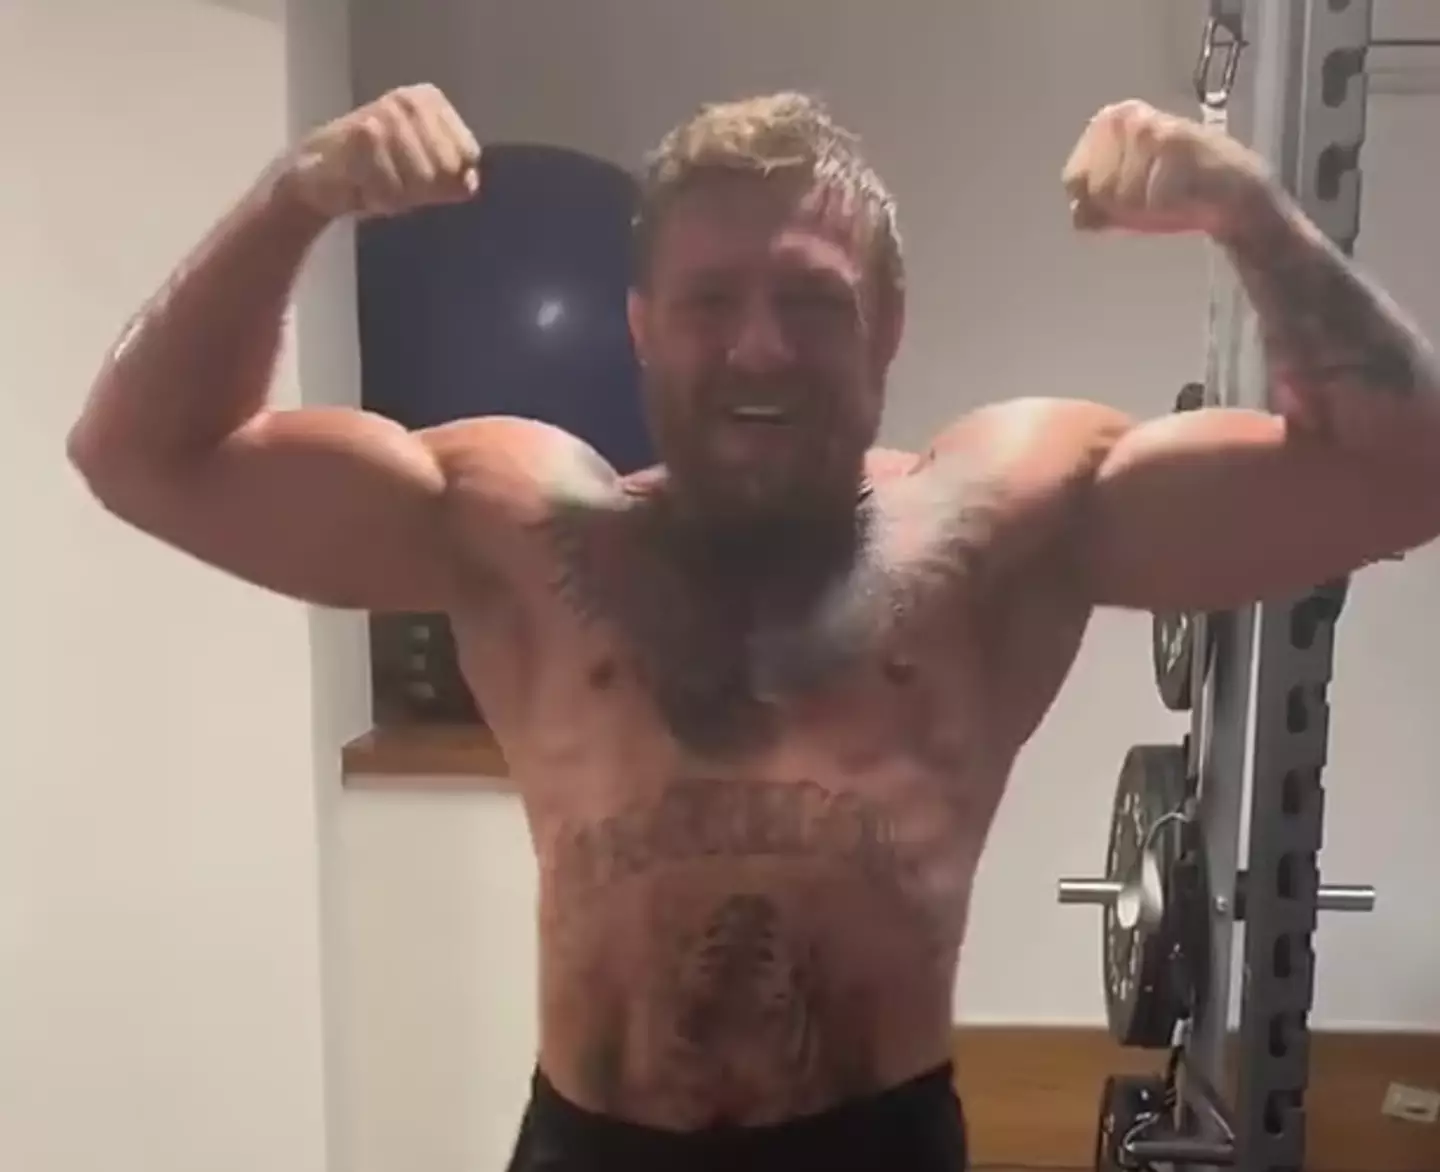 The MMA fighter has been working on his physique after breaking his leg in 2021.